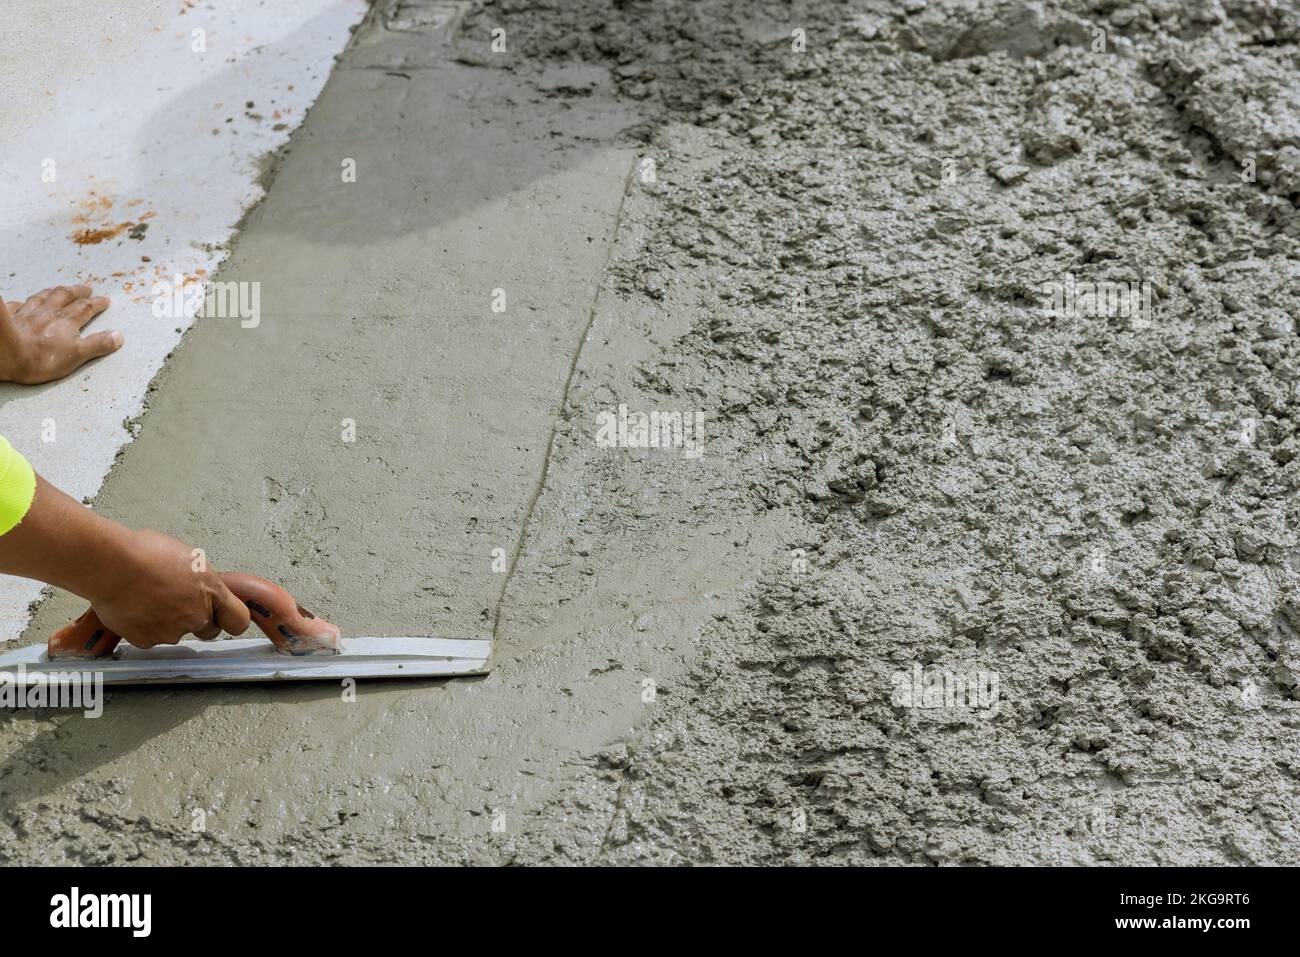 In construction area worker is holding steel trowel to smooth leveling over freshly poured concrete sidewalk Stock Photo